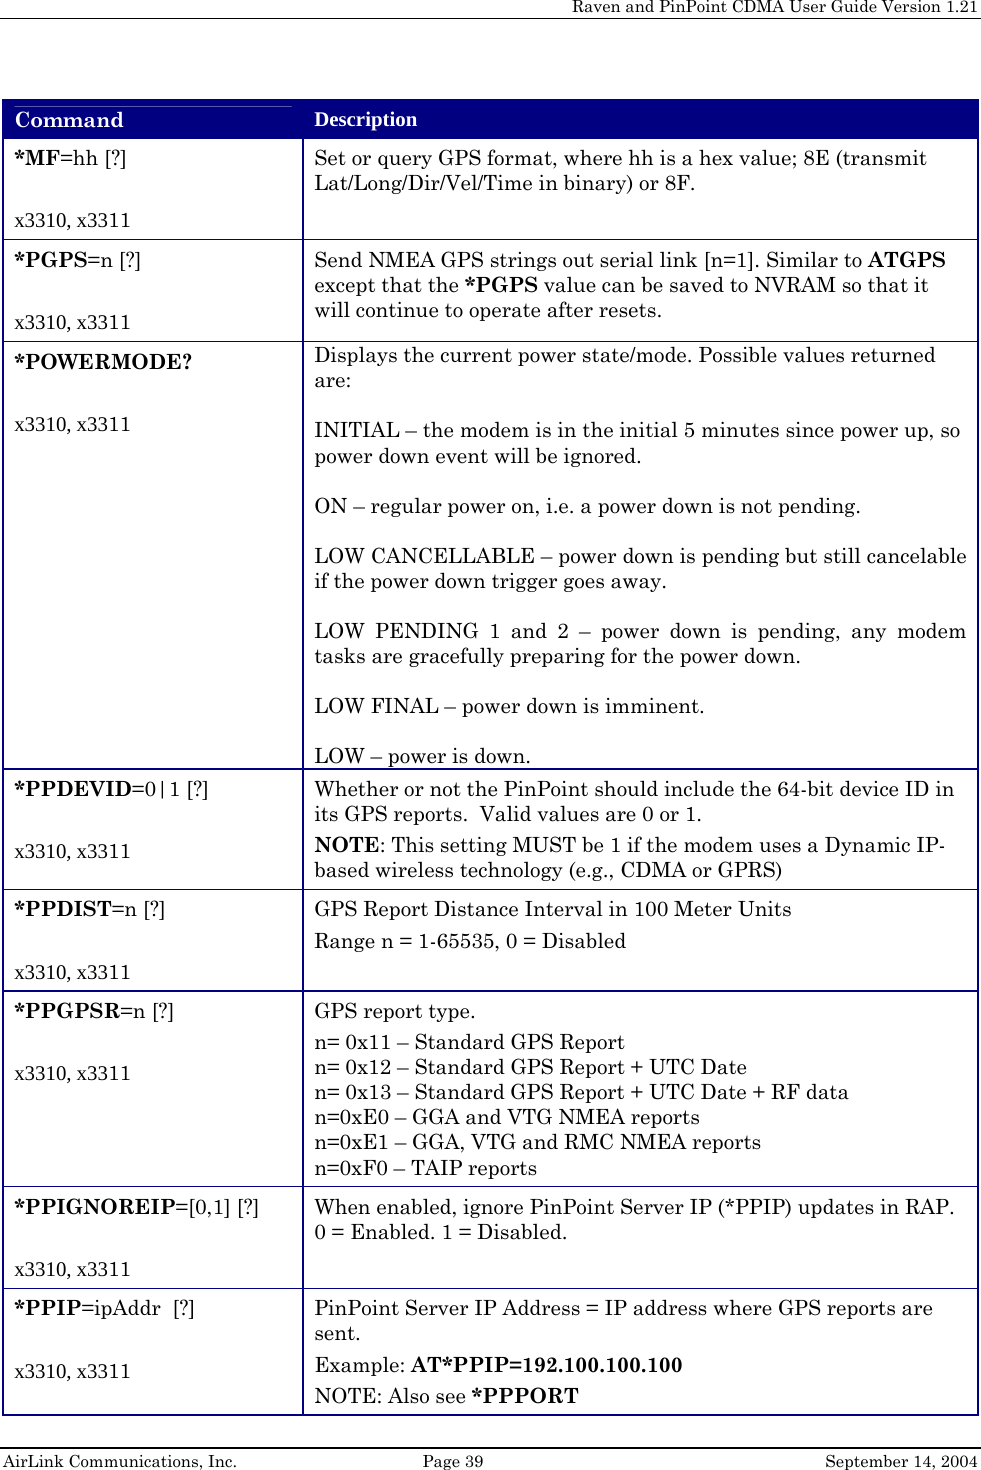     Raven and PinPoint CDMA User Guide Version 1.21  AirLink Communications, Inc.  Page 39  September 14, 2004 Command  Description *MF=hh [?]  x3310, x3311 Set or query GPS format, where hh is a hex value; 8E (transmit Lat/Long/Dir/Vel/Time in binary) or 8F. *PGPS=n [?]  x3310, x3311 Send NMEA GPS strings out serial link [n=1]. Similar to ATGPS except that the *PGPS value can be saved to NVRAM so that it will continue to operate after resets. *POWERMODE?   x3310, x3311 Displays the current power state/mode. Possible values returned are:  INITIAL – the modem is in the initial 5 minutes since power up, so power down event will be ignored.  ON – regular power on, i.e. a power down is not pending.  LOW CANCELLABLE – power down is pending but still cancelable if the power down trigger goes away.  LOW PENDING 1 and 2 – power down is pending, any modem tasks are gracefully preparing for the power down.  LOW FINAL – power down is imminent.  LOW – power is down. *PPDEVID=0|1 [?]  x3310, x3311 Whether or not the PinPoint should include the 64-bit device ID in its GPS reports.  Valid values are 0 or 1. NOTE: This setting MUST be 1 if the modem uses a Dynamic IP-based wireless technology (e.g., CDMA or GPRS) *PPDIST=n [?]  x3310, x3311 GPS Report Distance Interval in 100 Meter Units   Range n = 1-65535, 0 = Disabled *PPGPSR=n [?]  x3310, x3311 GPS report type.  n= 0x11 – Standard GPS Report n= 0x12 – Standard GPS Report + UTC Date n= 0x13 – Standard GPS Report + UTC Date + RF data n=0xE0 – GGA and VTG NMEA reports n=0xE1 – GGA, VTG and RMC NMEA reports n=0xF0 – TAIP reports *PPIGNOREIP=[0,1] [?]  x3310, x3311 When enabled, ignore PinPoint Server IP (*PPIP) updates in RAP. 0 = Enabled. 1 = Disabled. *PPIP=ipAddr  [?]  x3310, x3311 PinPoint Server IP Address = IP address where GPS reports are sent. Example: AT*PPIP=192.100.100.100 NOTE: Also see *PPPORT 